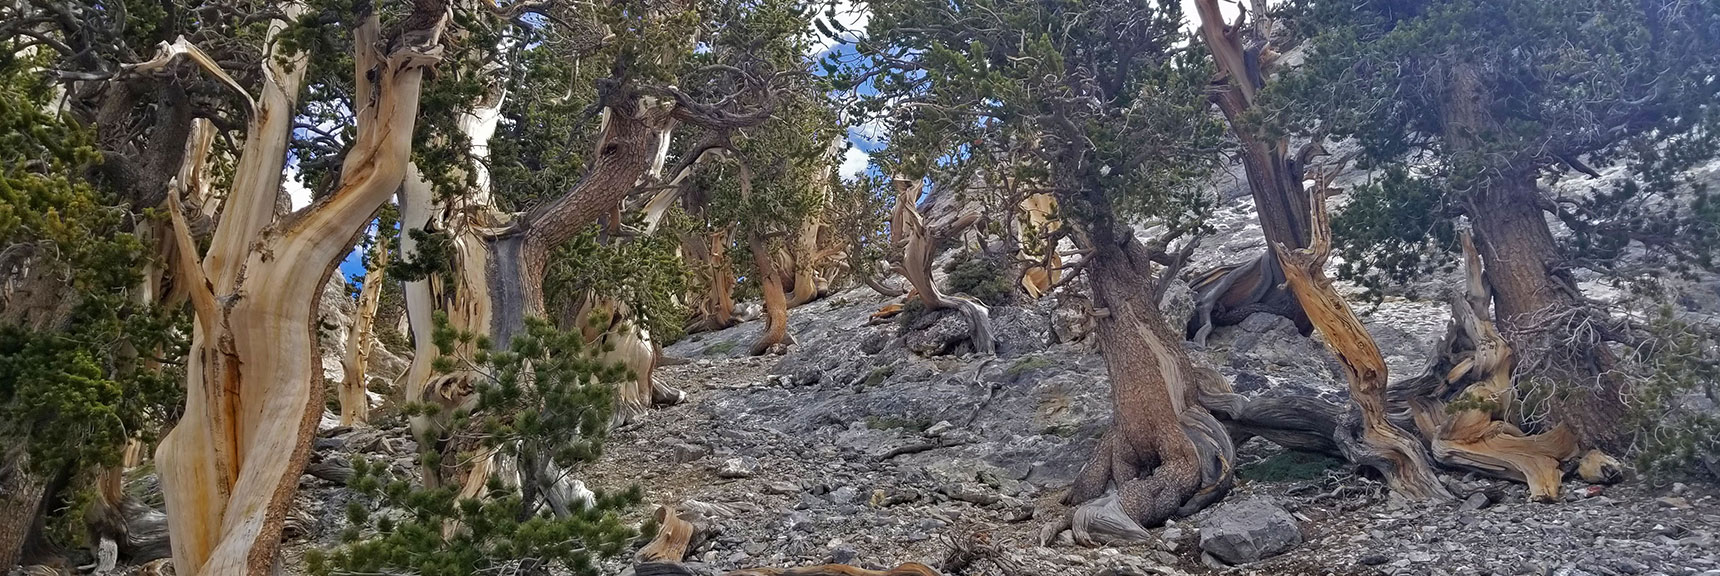 Bristlecone Pines Form Countless Unique Fantastic Shapes | The Sisters South | Lee Canyon | Mt Charleston Wilderness | Spring Mountains, Nevada